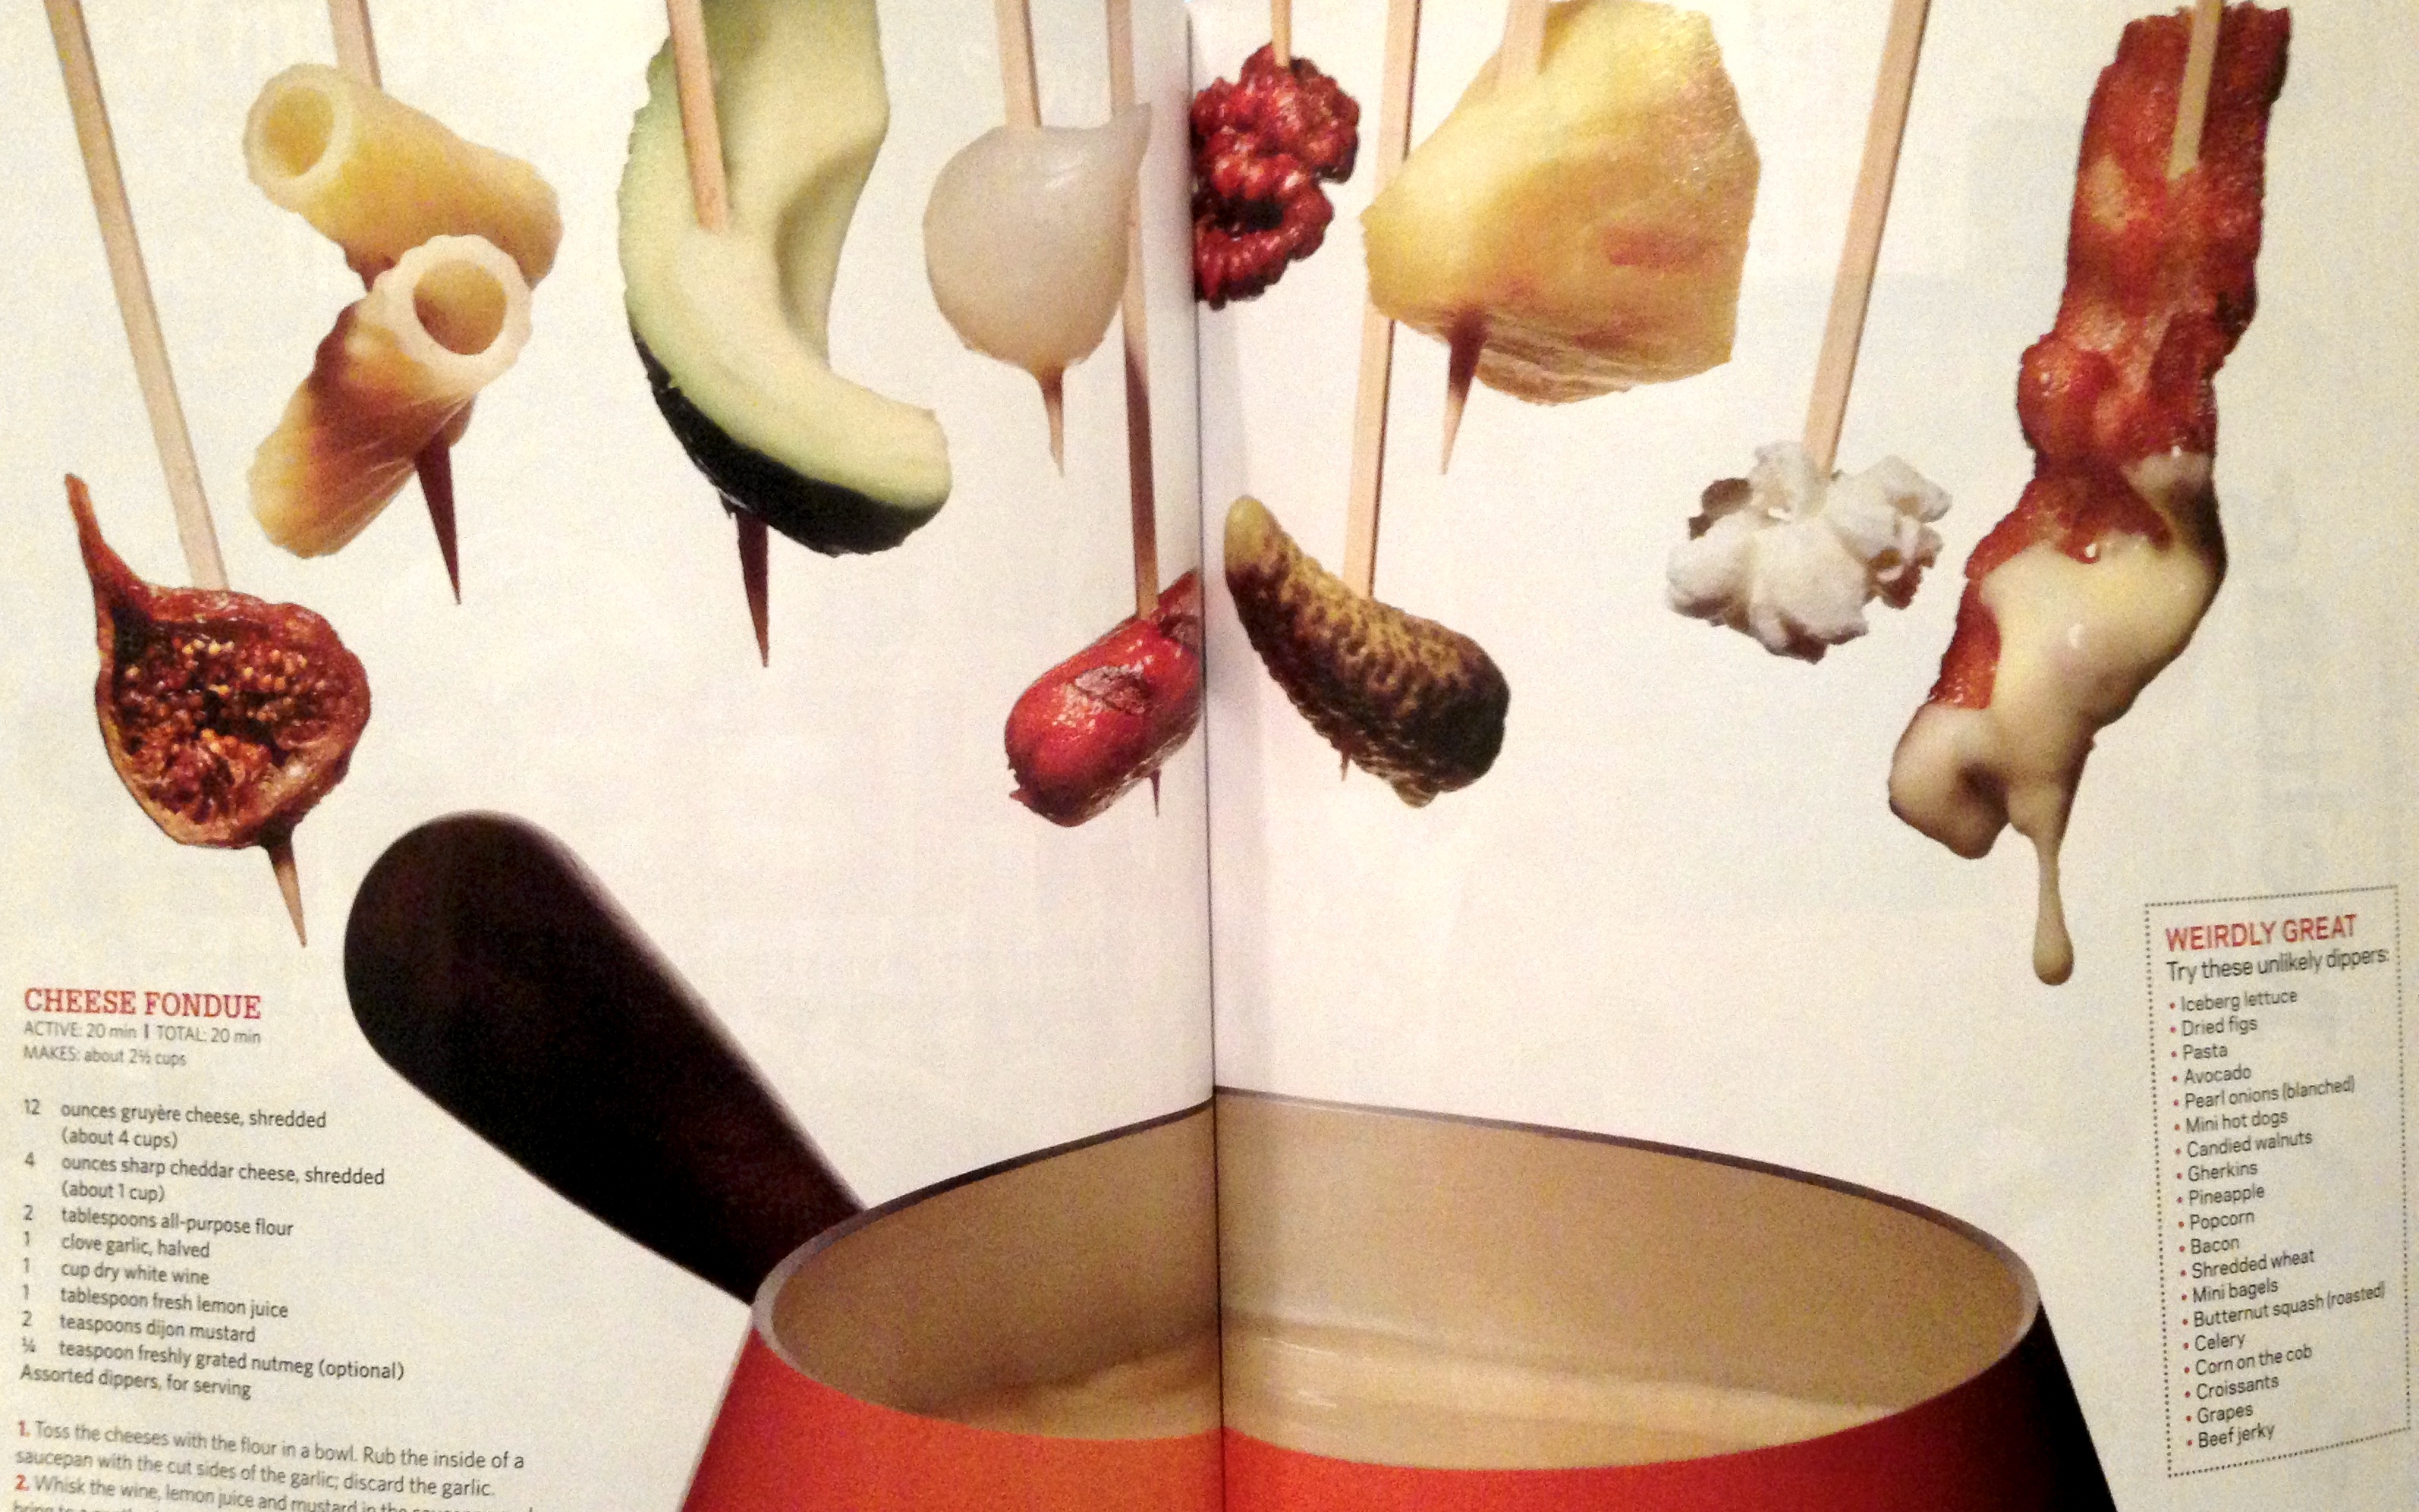 Can you dip it in cheese? Fondue foods